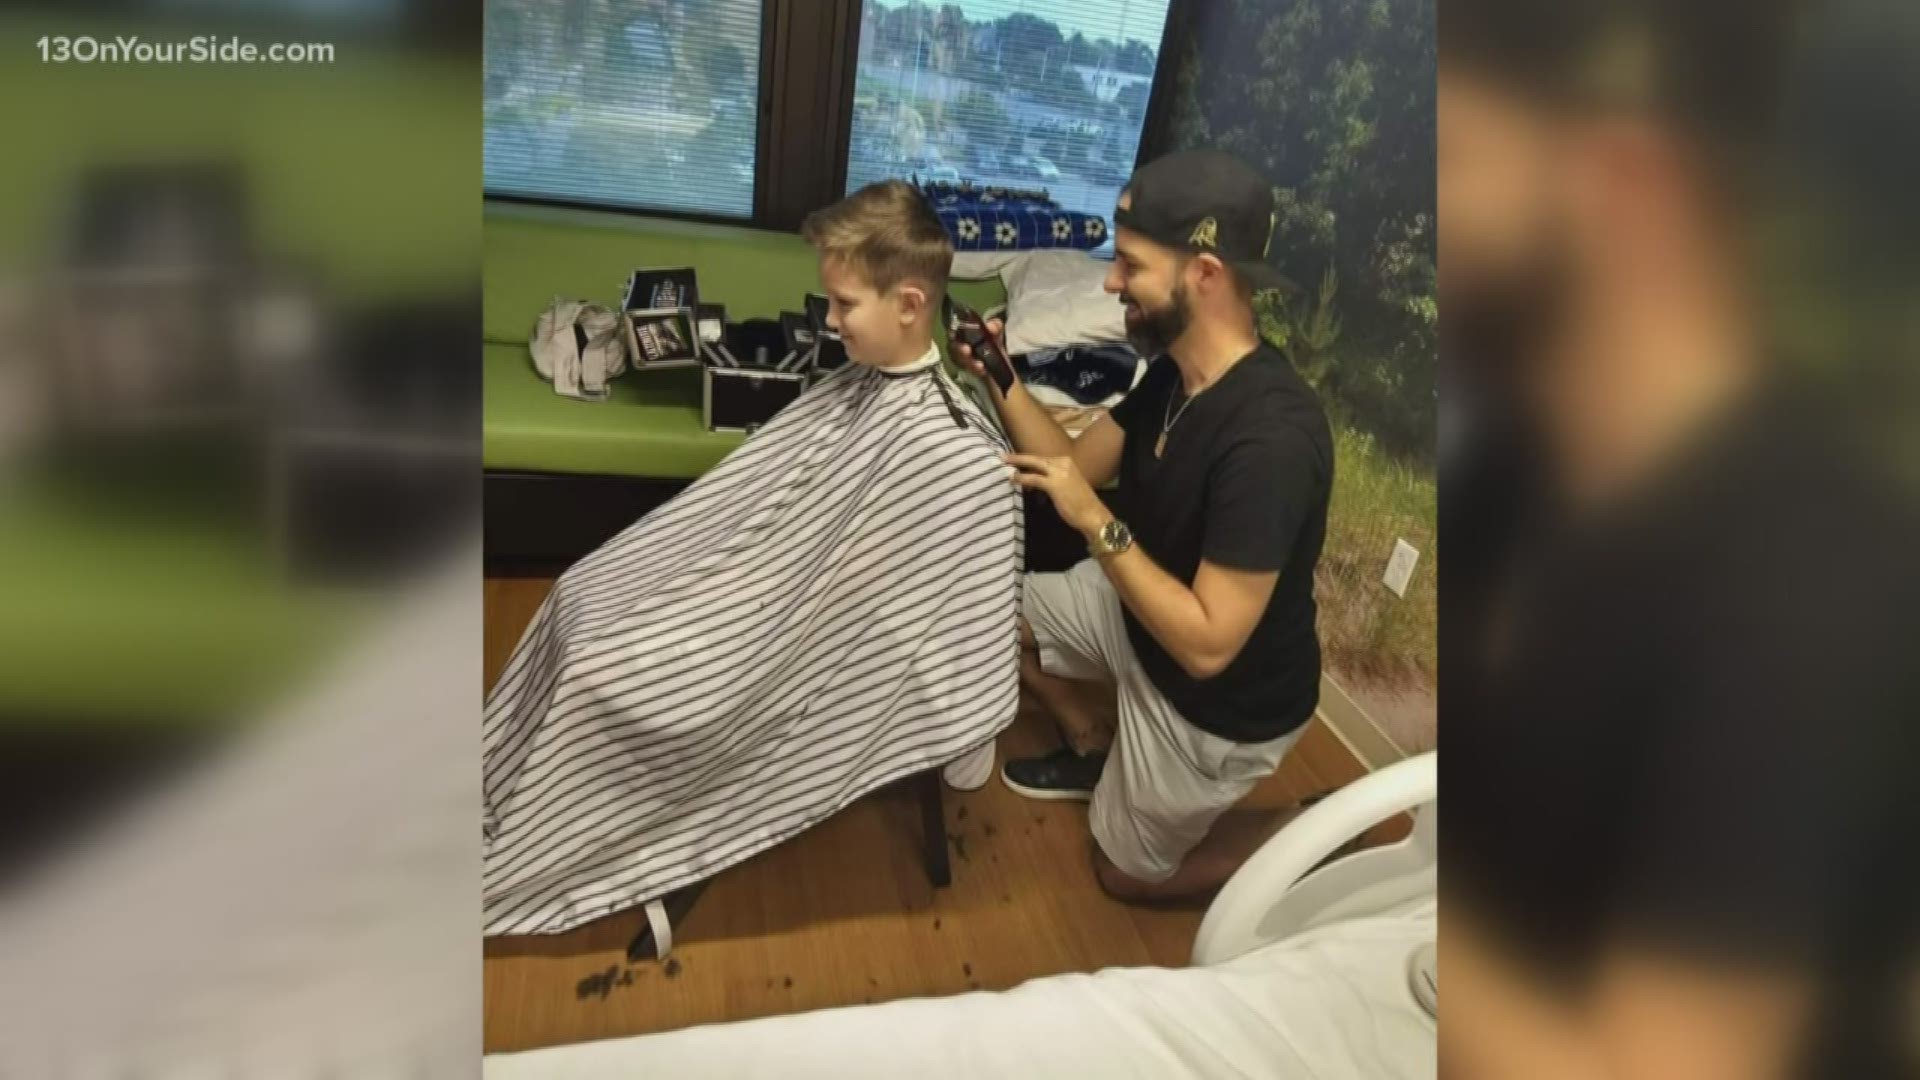 When Jackson had an extended stay in the hospital, a barber came to him.